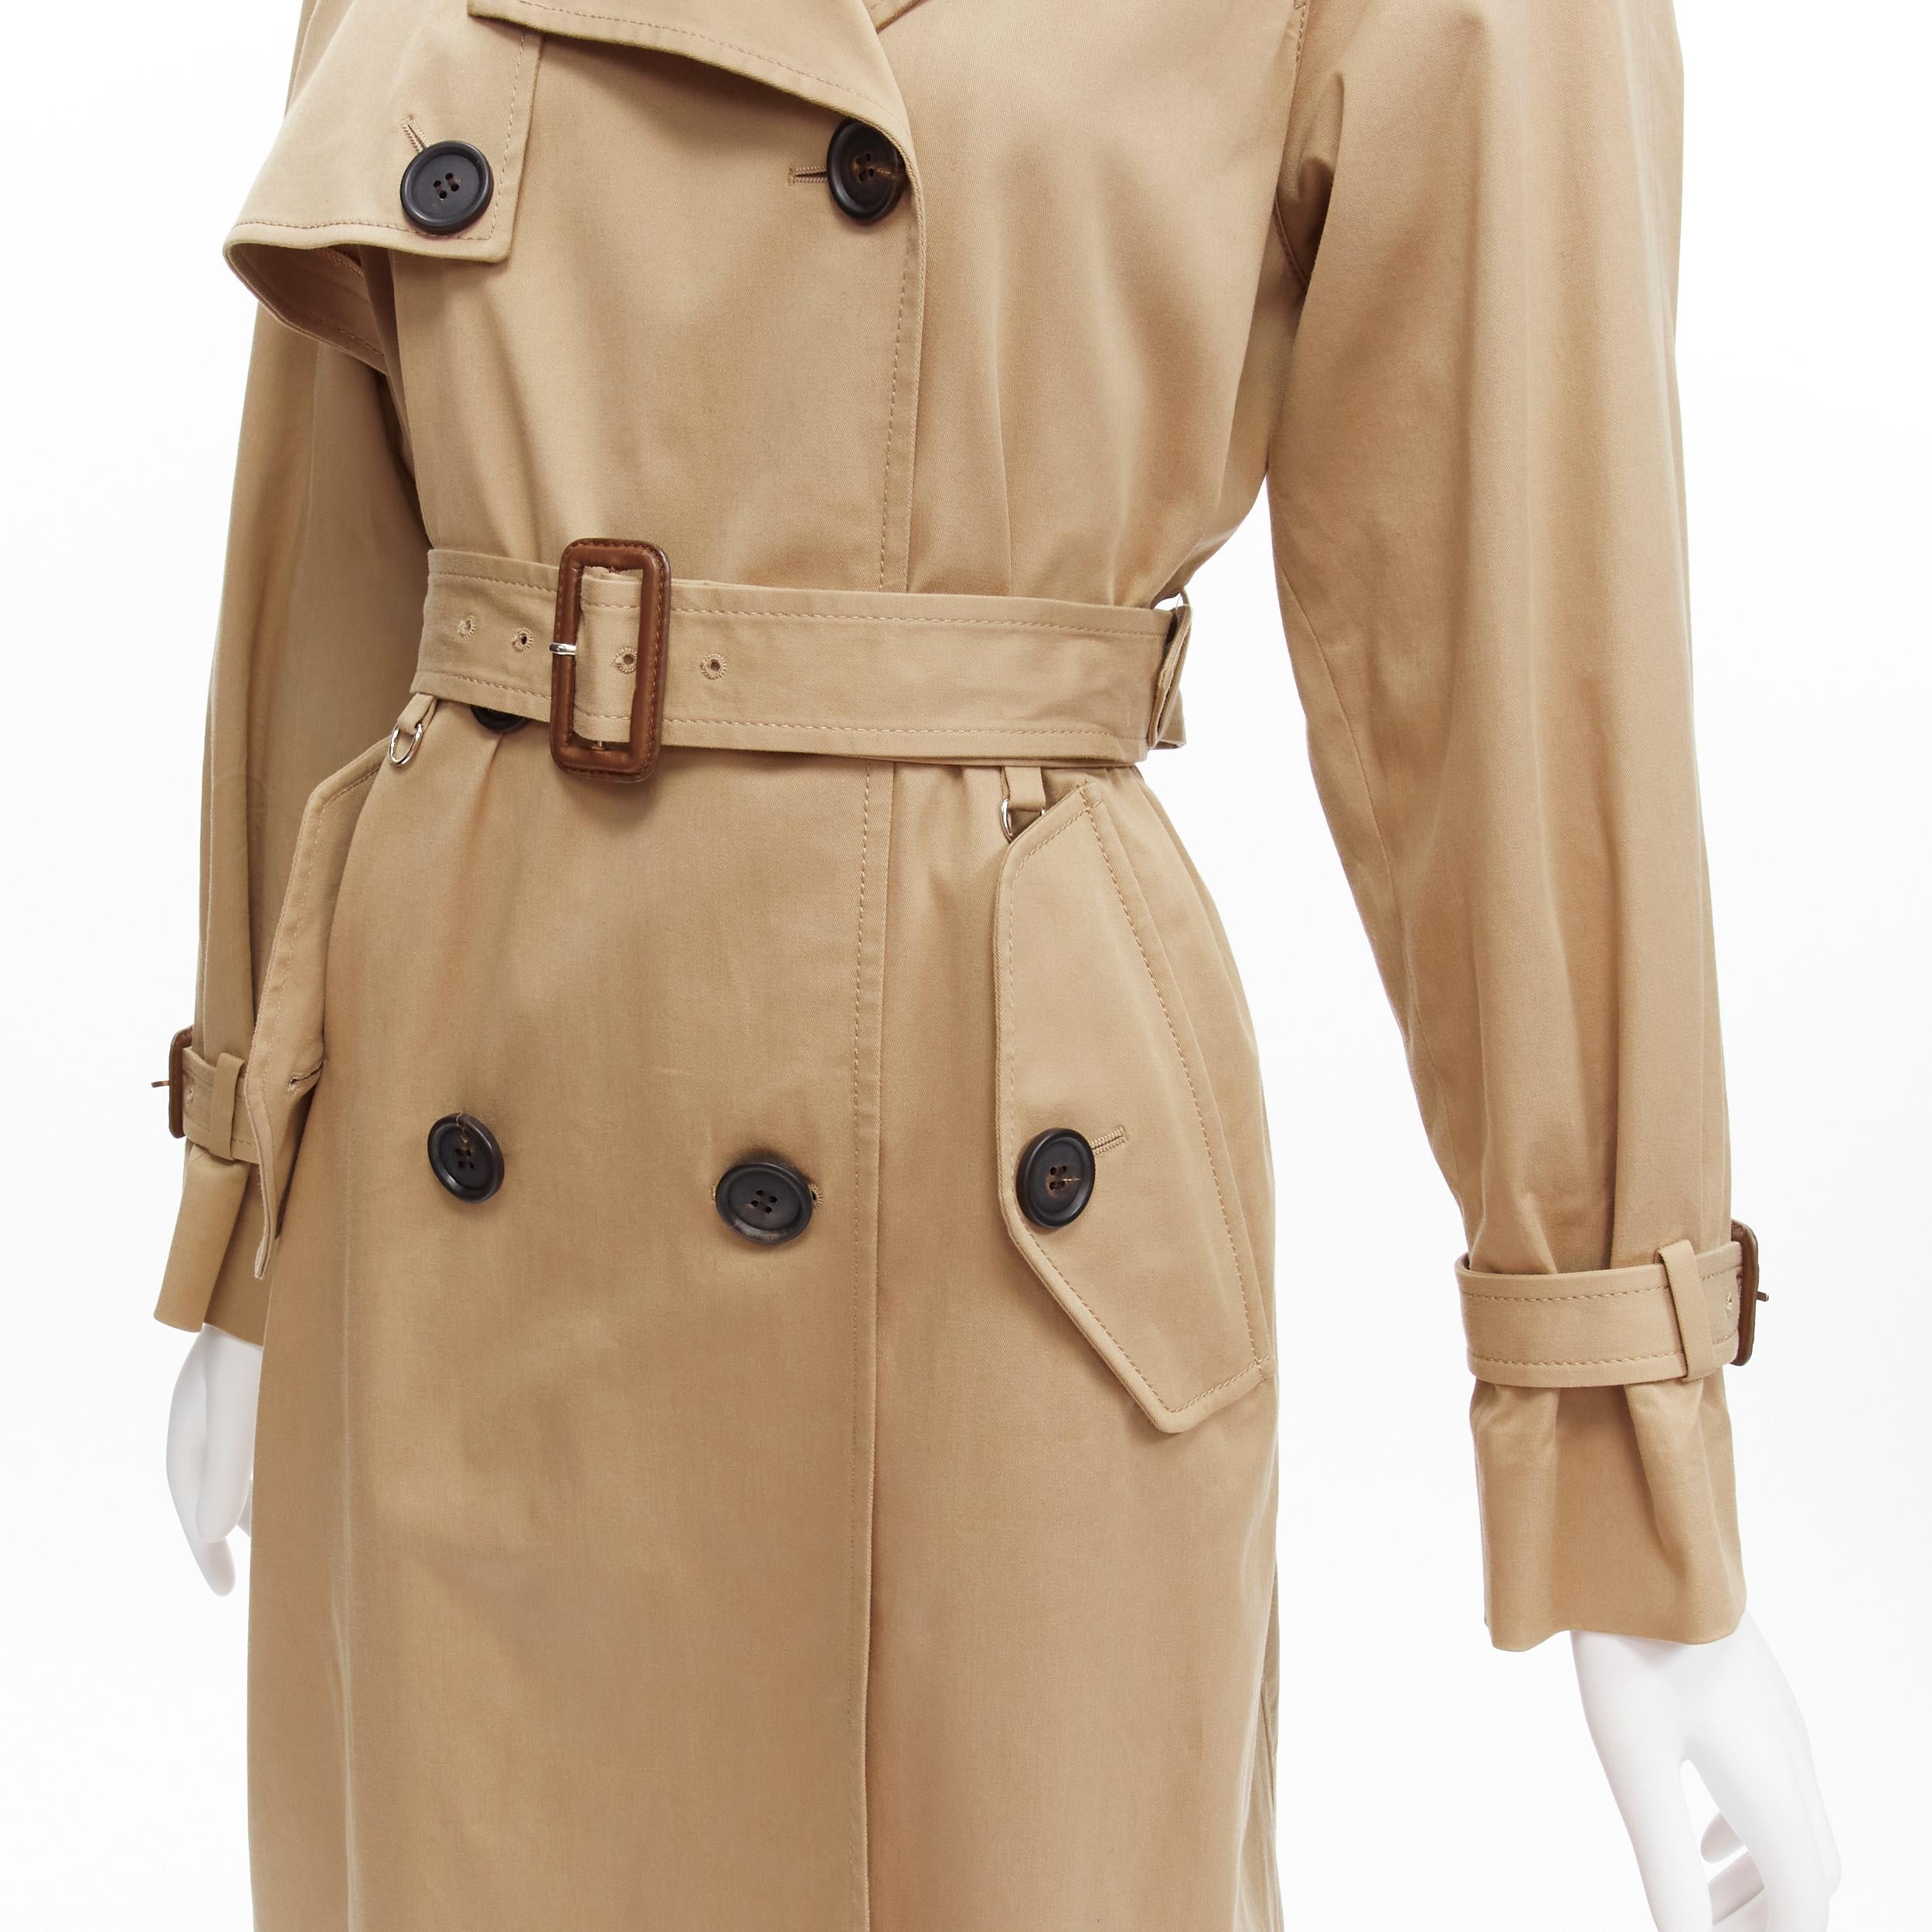 MIU MIU 2018 khaki cotton blend classic double breasted belted trench coat IT36 XXS
Reference: TGAS/D00117
Brand: Miu Miu
Designer: Miuccia Prada
Collection: 2018
Material: Cotton, Elastane
Color: Brown
Pattern: Solid
Closure: Button
Lining: Black